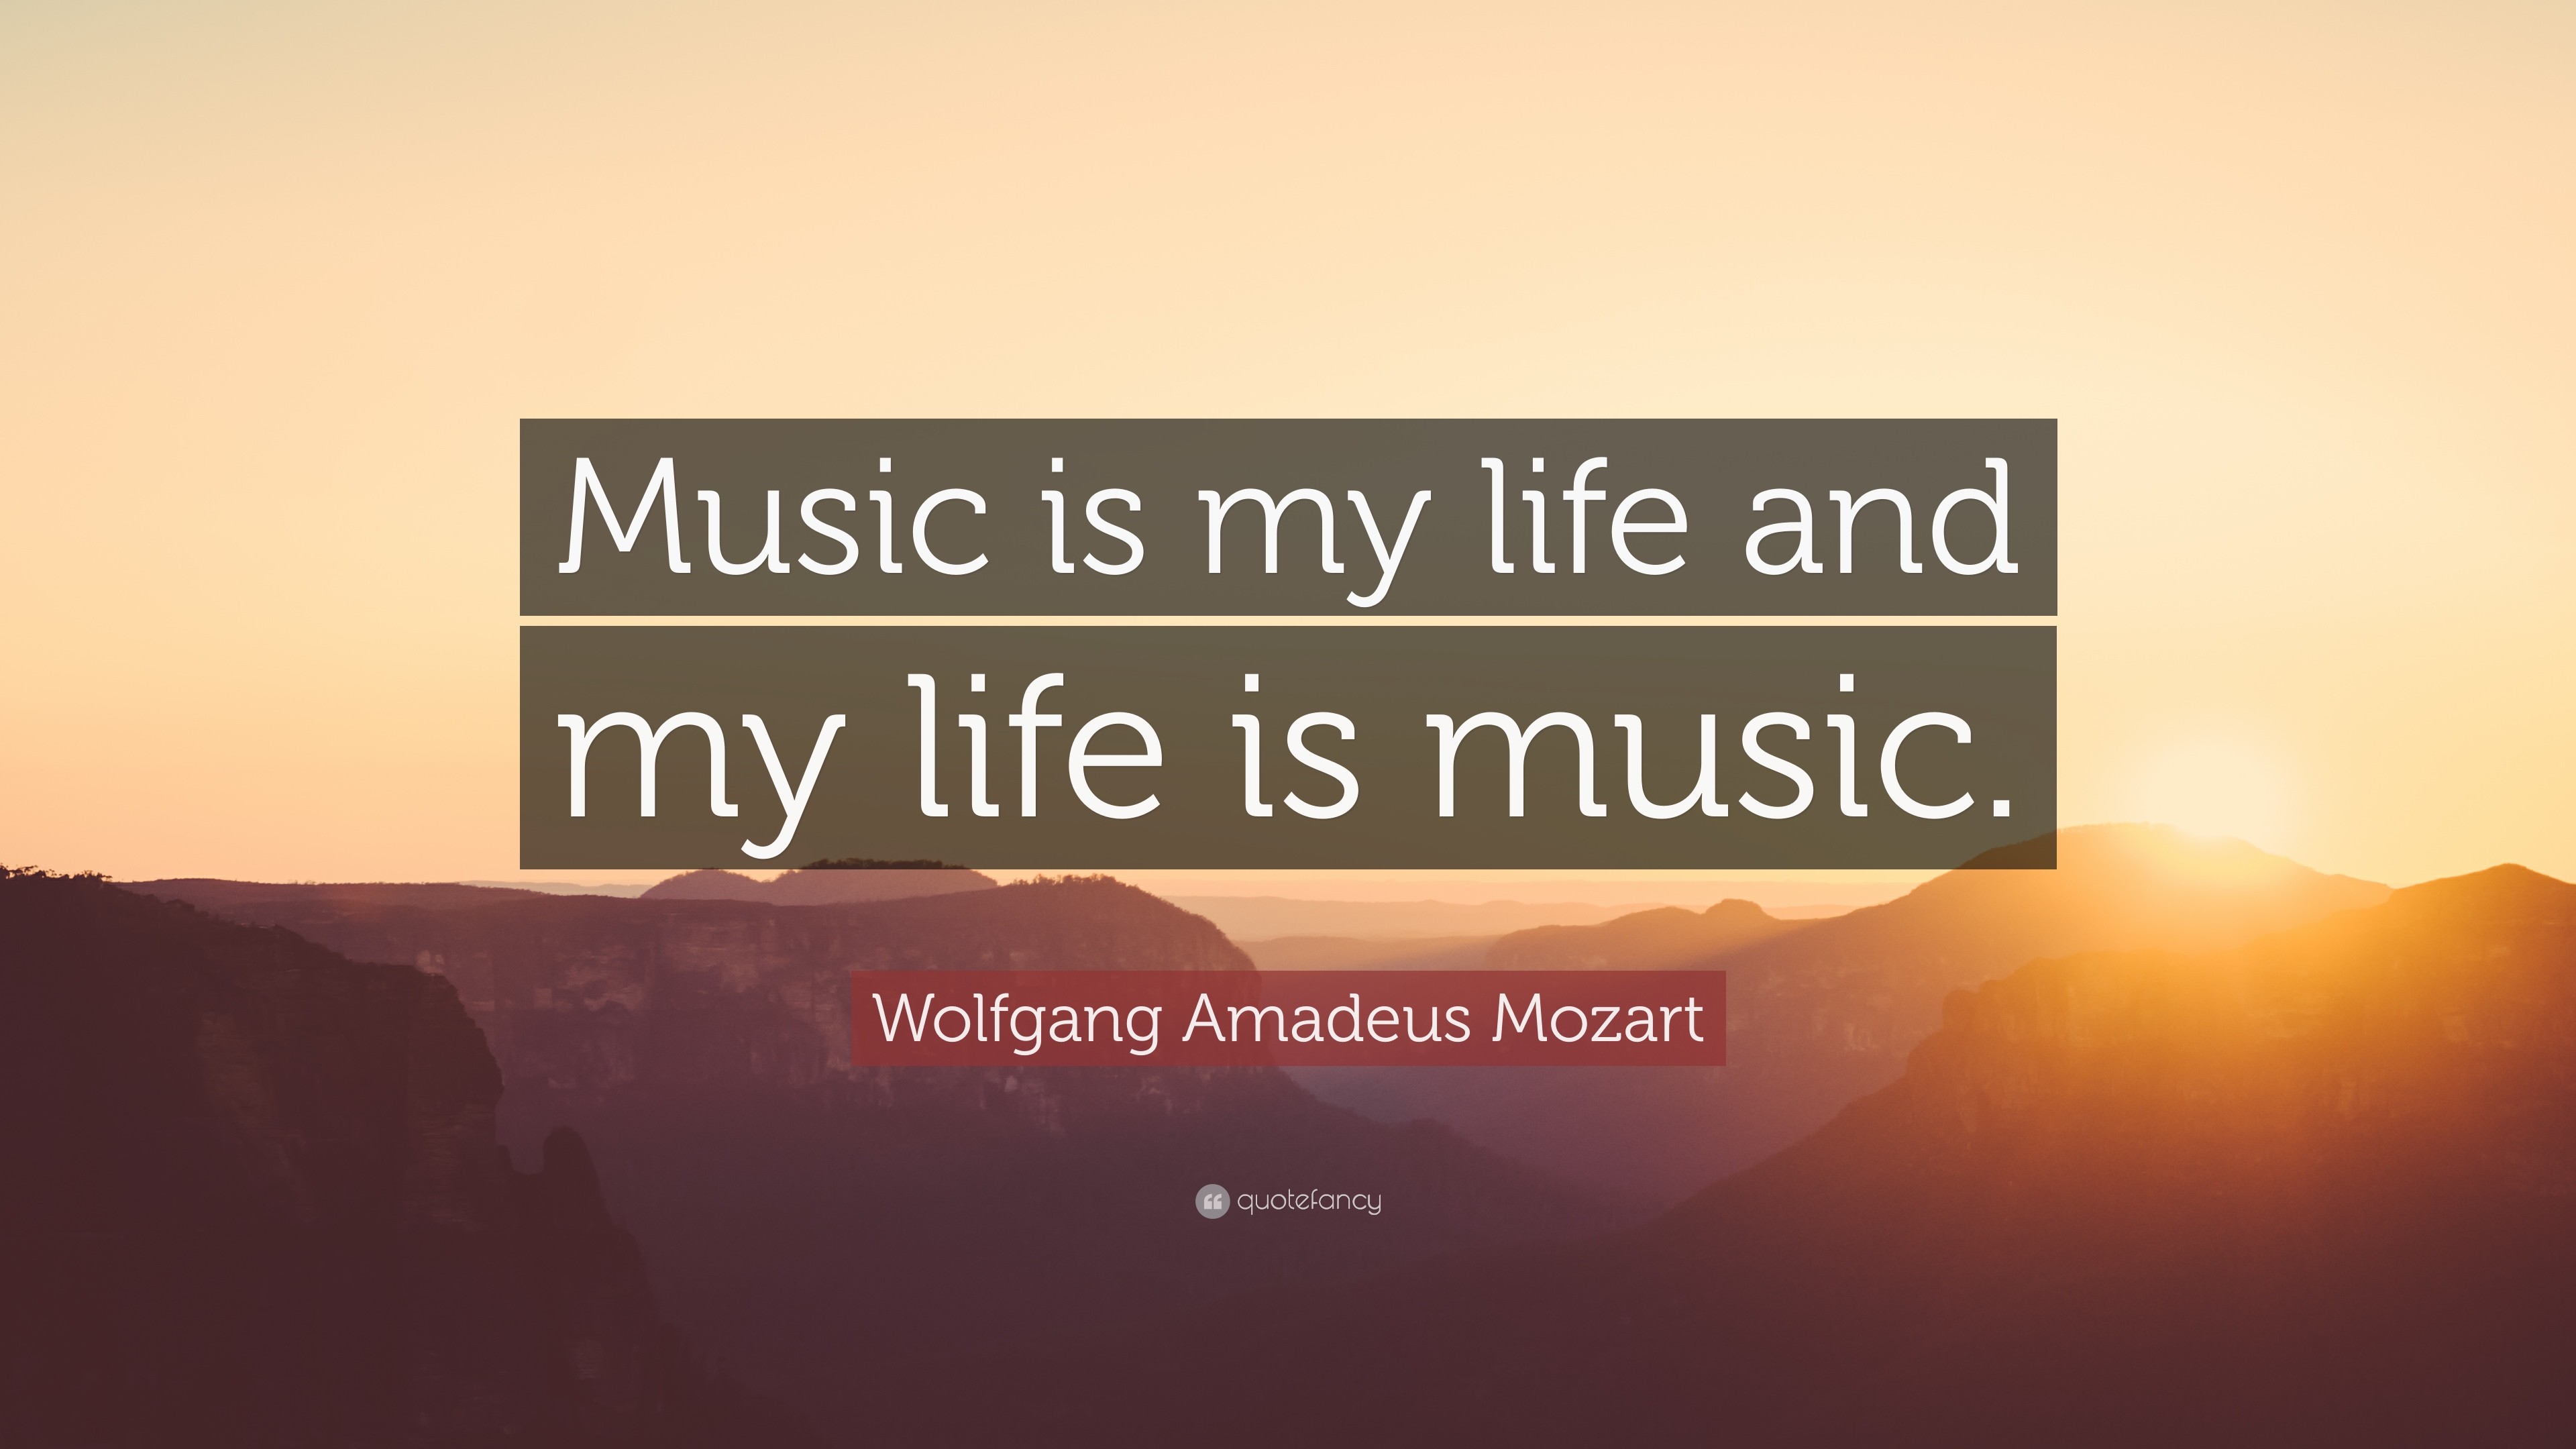 Wolfgang Amadeus Mozart Quote - Worth A Thousand Words Quote - HD Wallpaper 